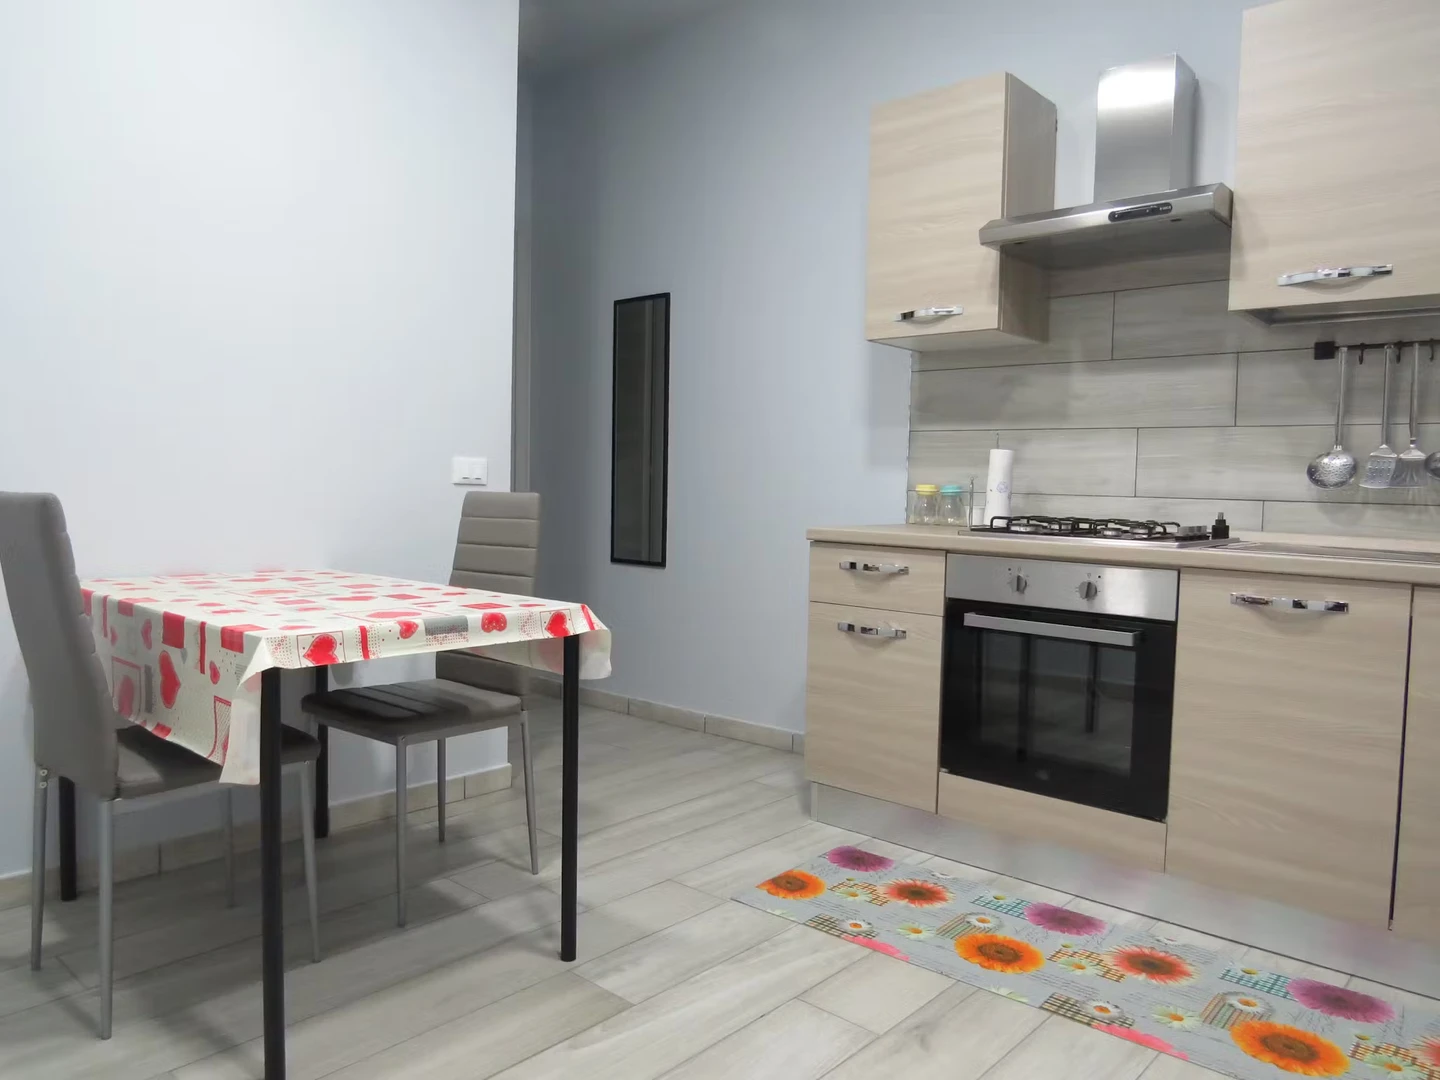 Accommodation in the centre of Catania